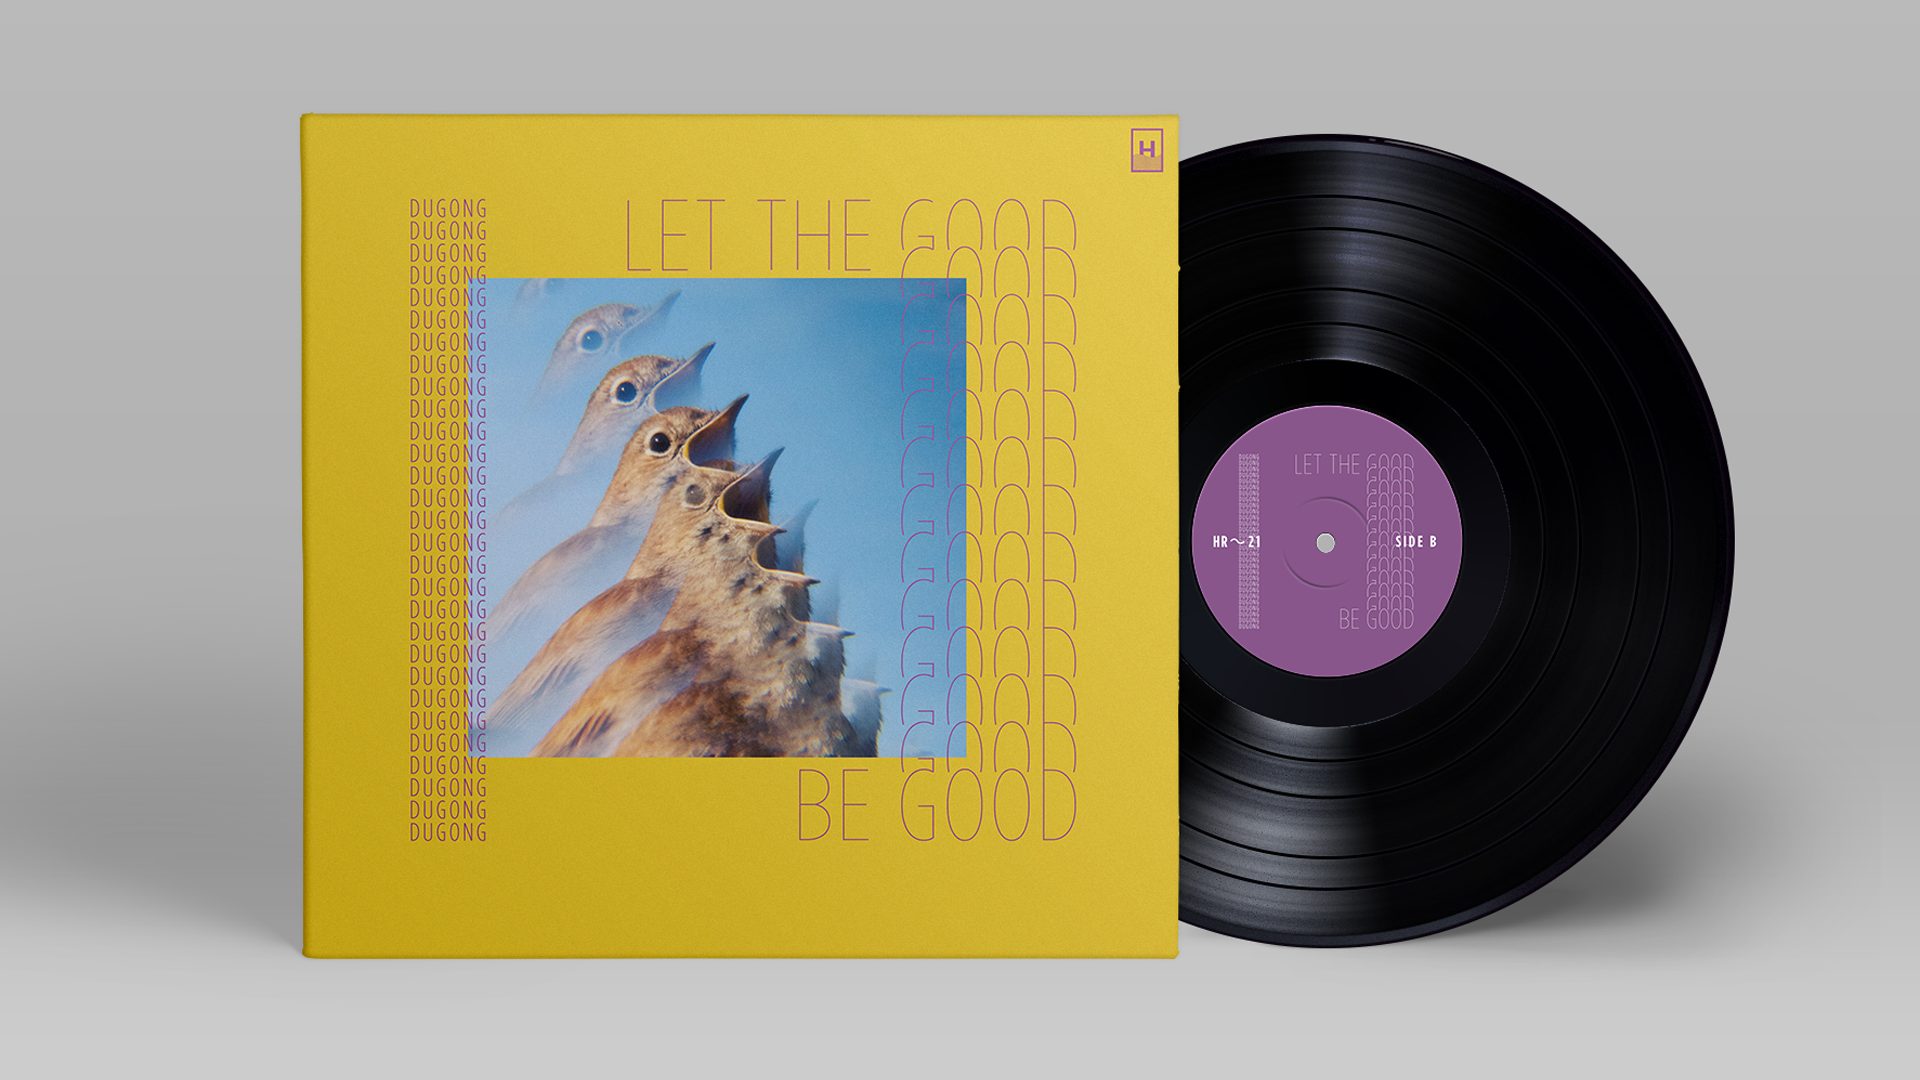 Permalink to: Order the new album LET THE GOOD BE GOOD